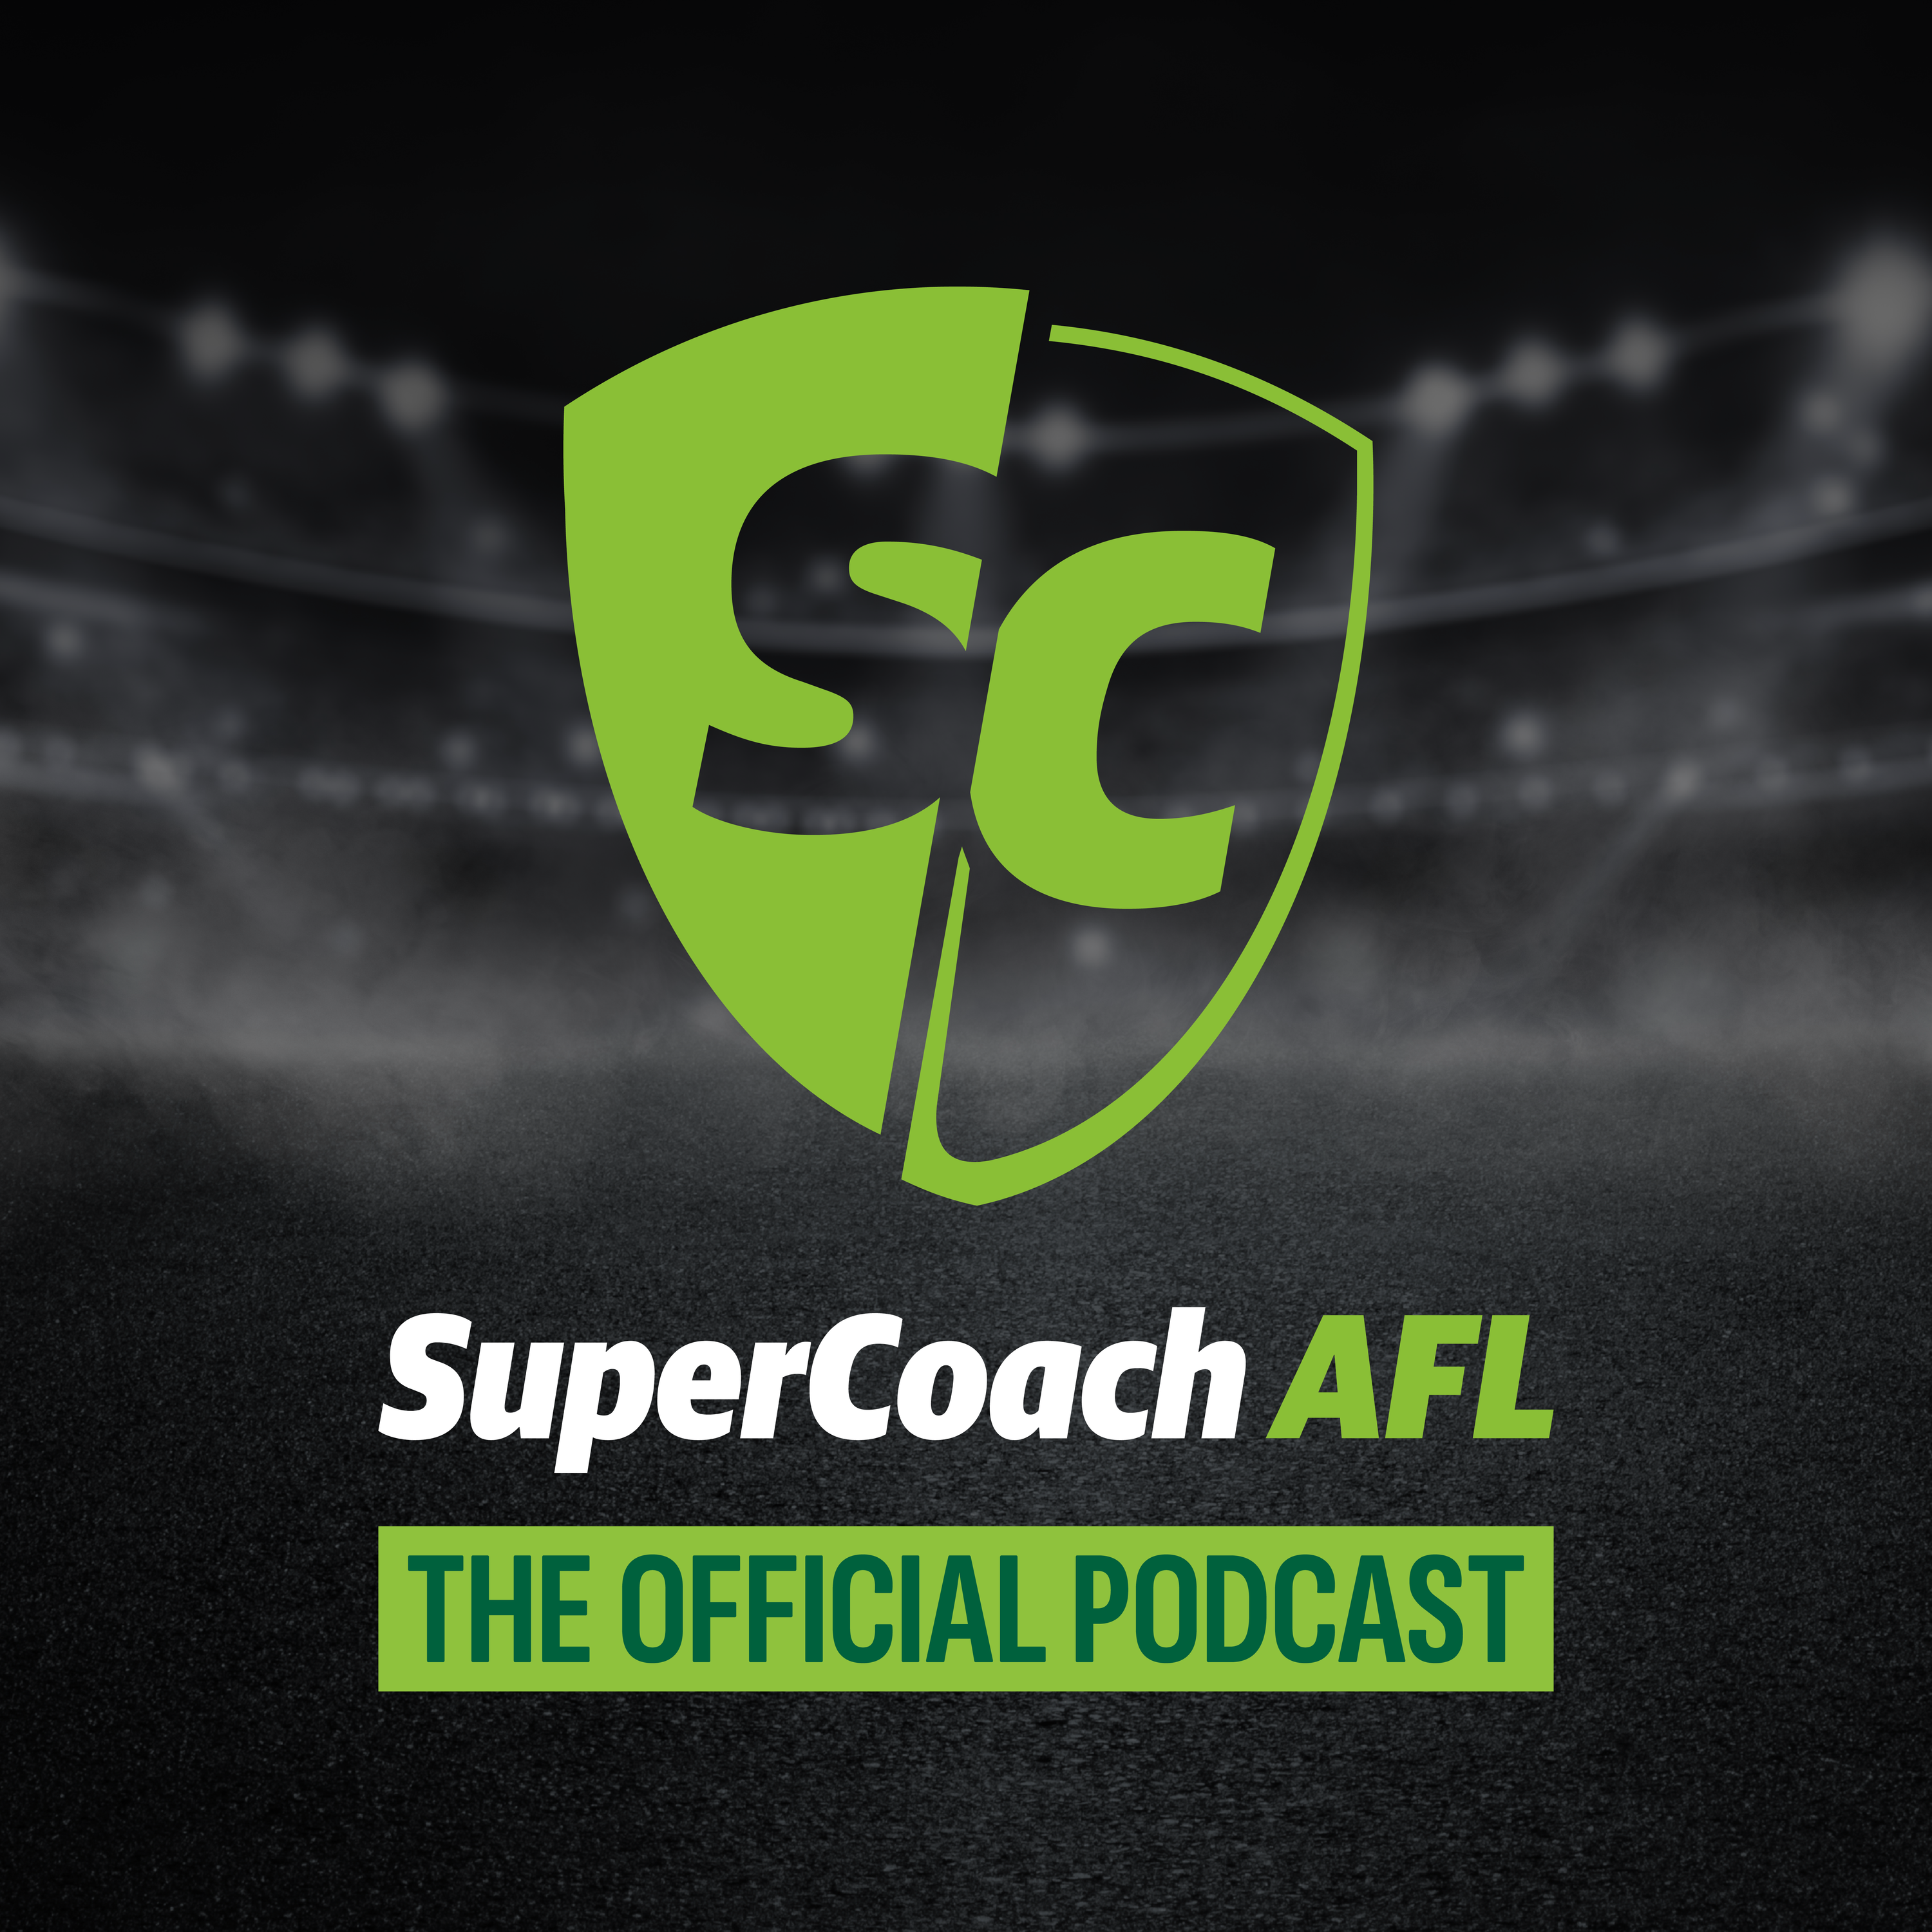 KFC SuperCoach: Overall leader's grand final tips